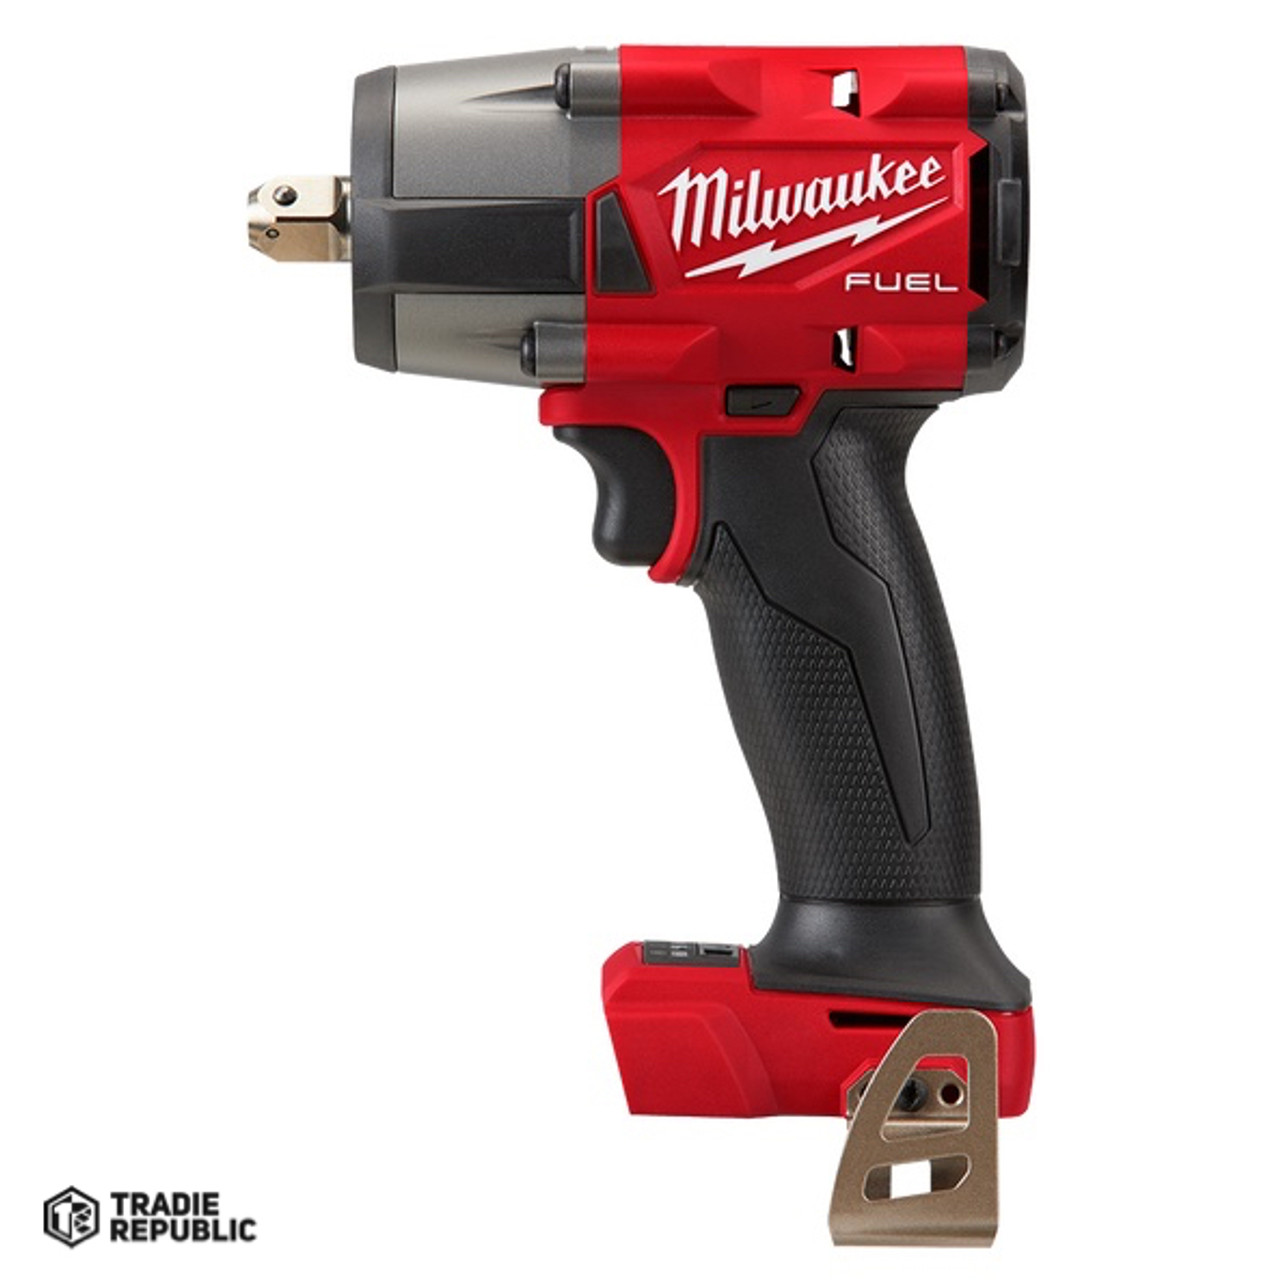 M18FMTIW2P12-0 Milwaukee M18FMTIW2P12-0 18V Li-ion Cordless Fuel 1/2" Mid-Torque Impact Wrench with Pin Detent - Skin Only